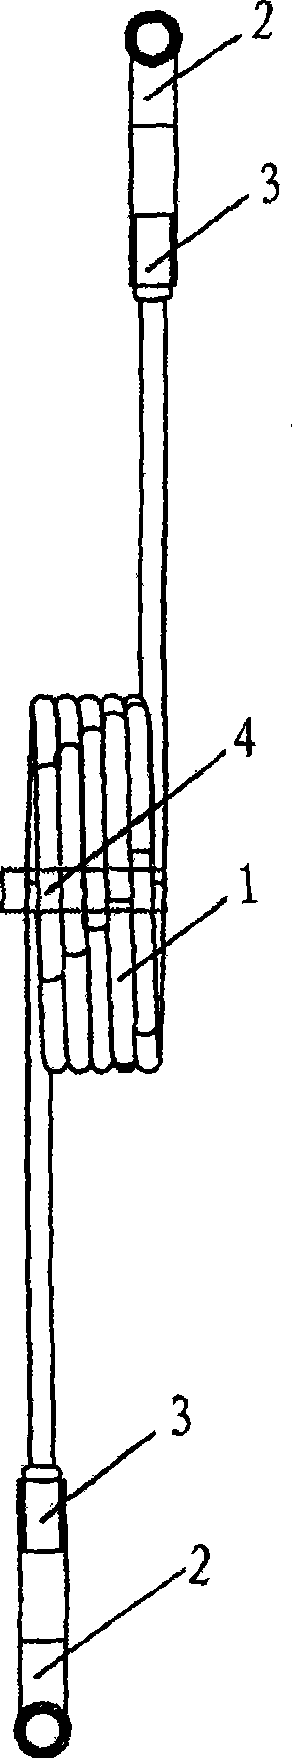 Throttle capillary tube fixing structure of air conditioner